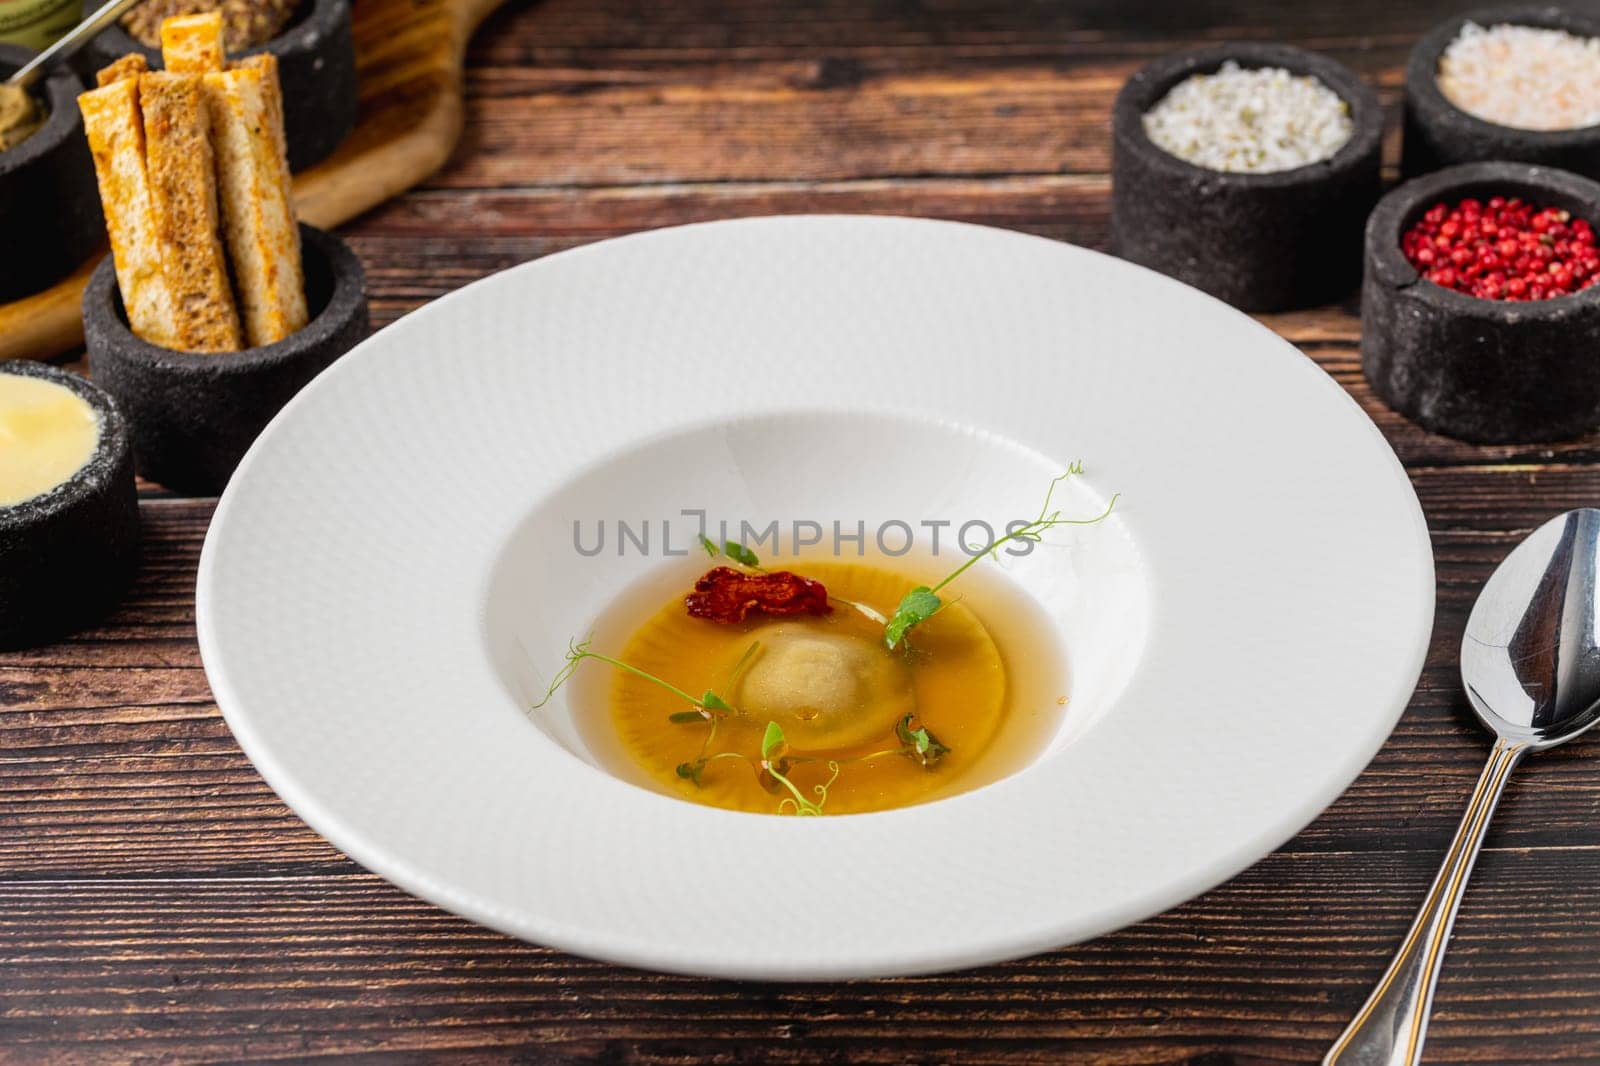 Ravioli consomme on a white porcelain plate. Healthy eating concept